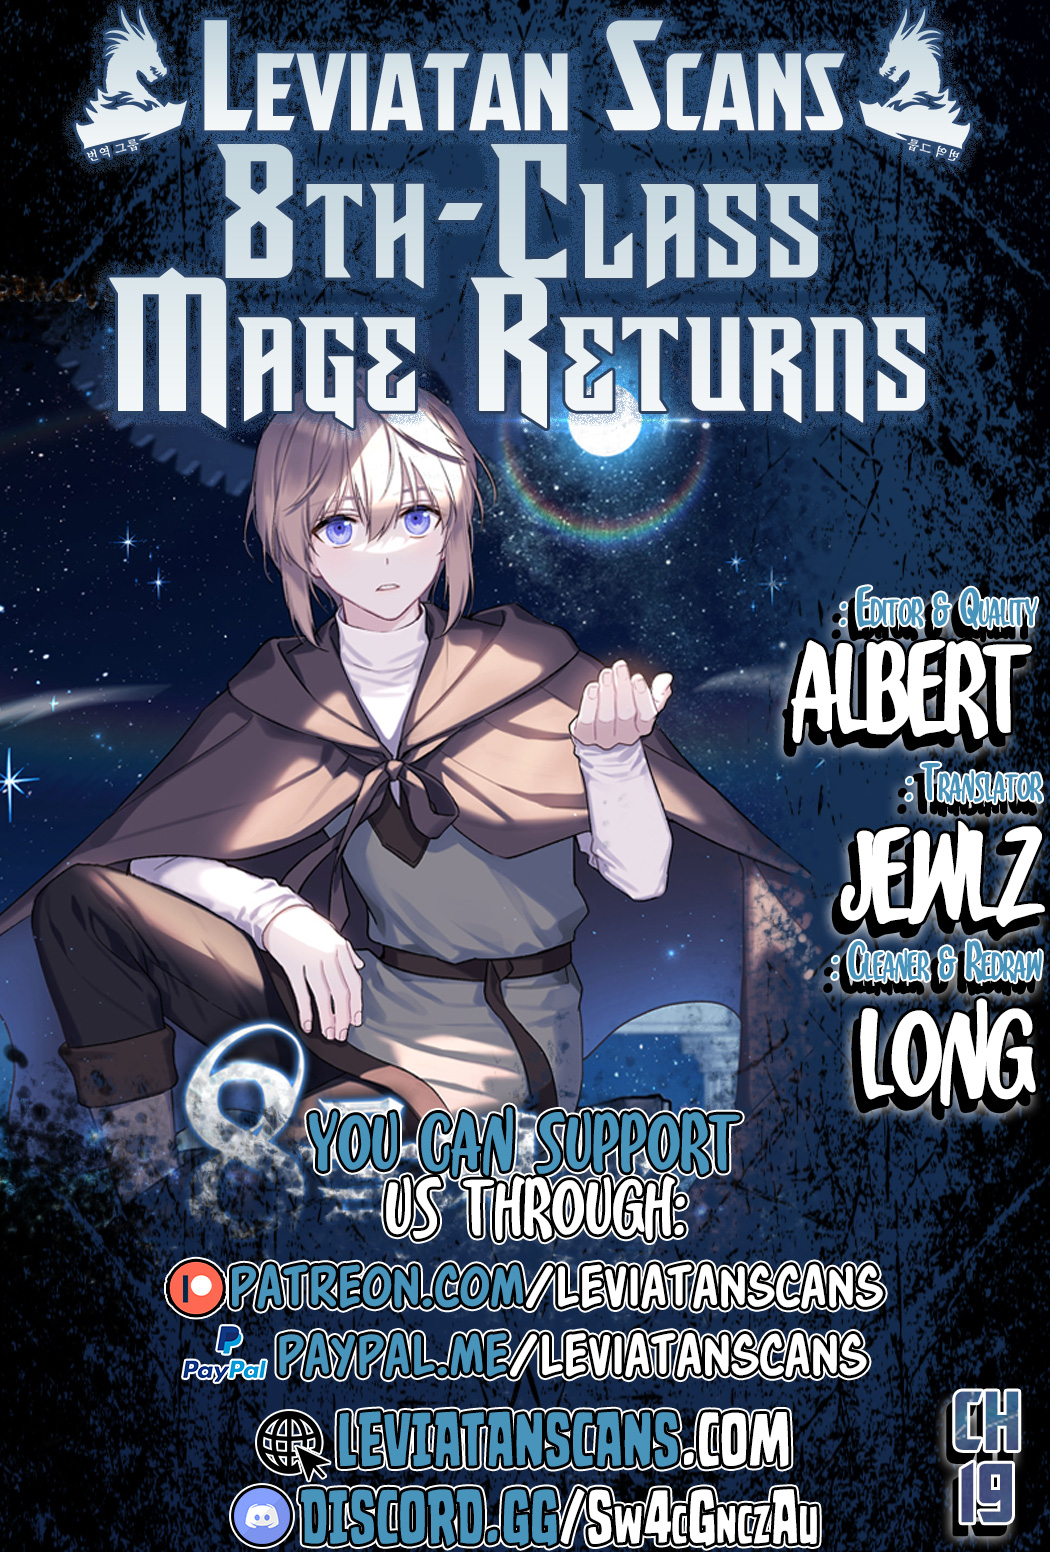 Return of the 8th Class Magician - Chapter 7138 - Image 1